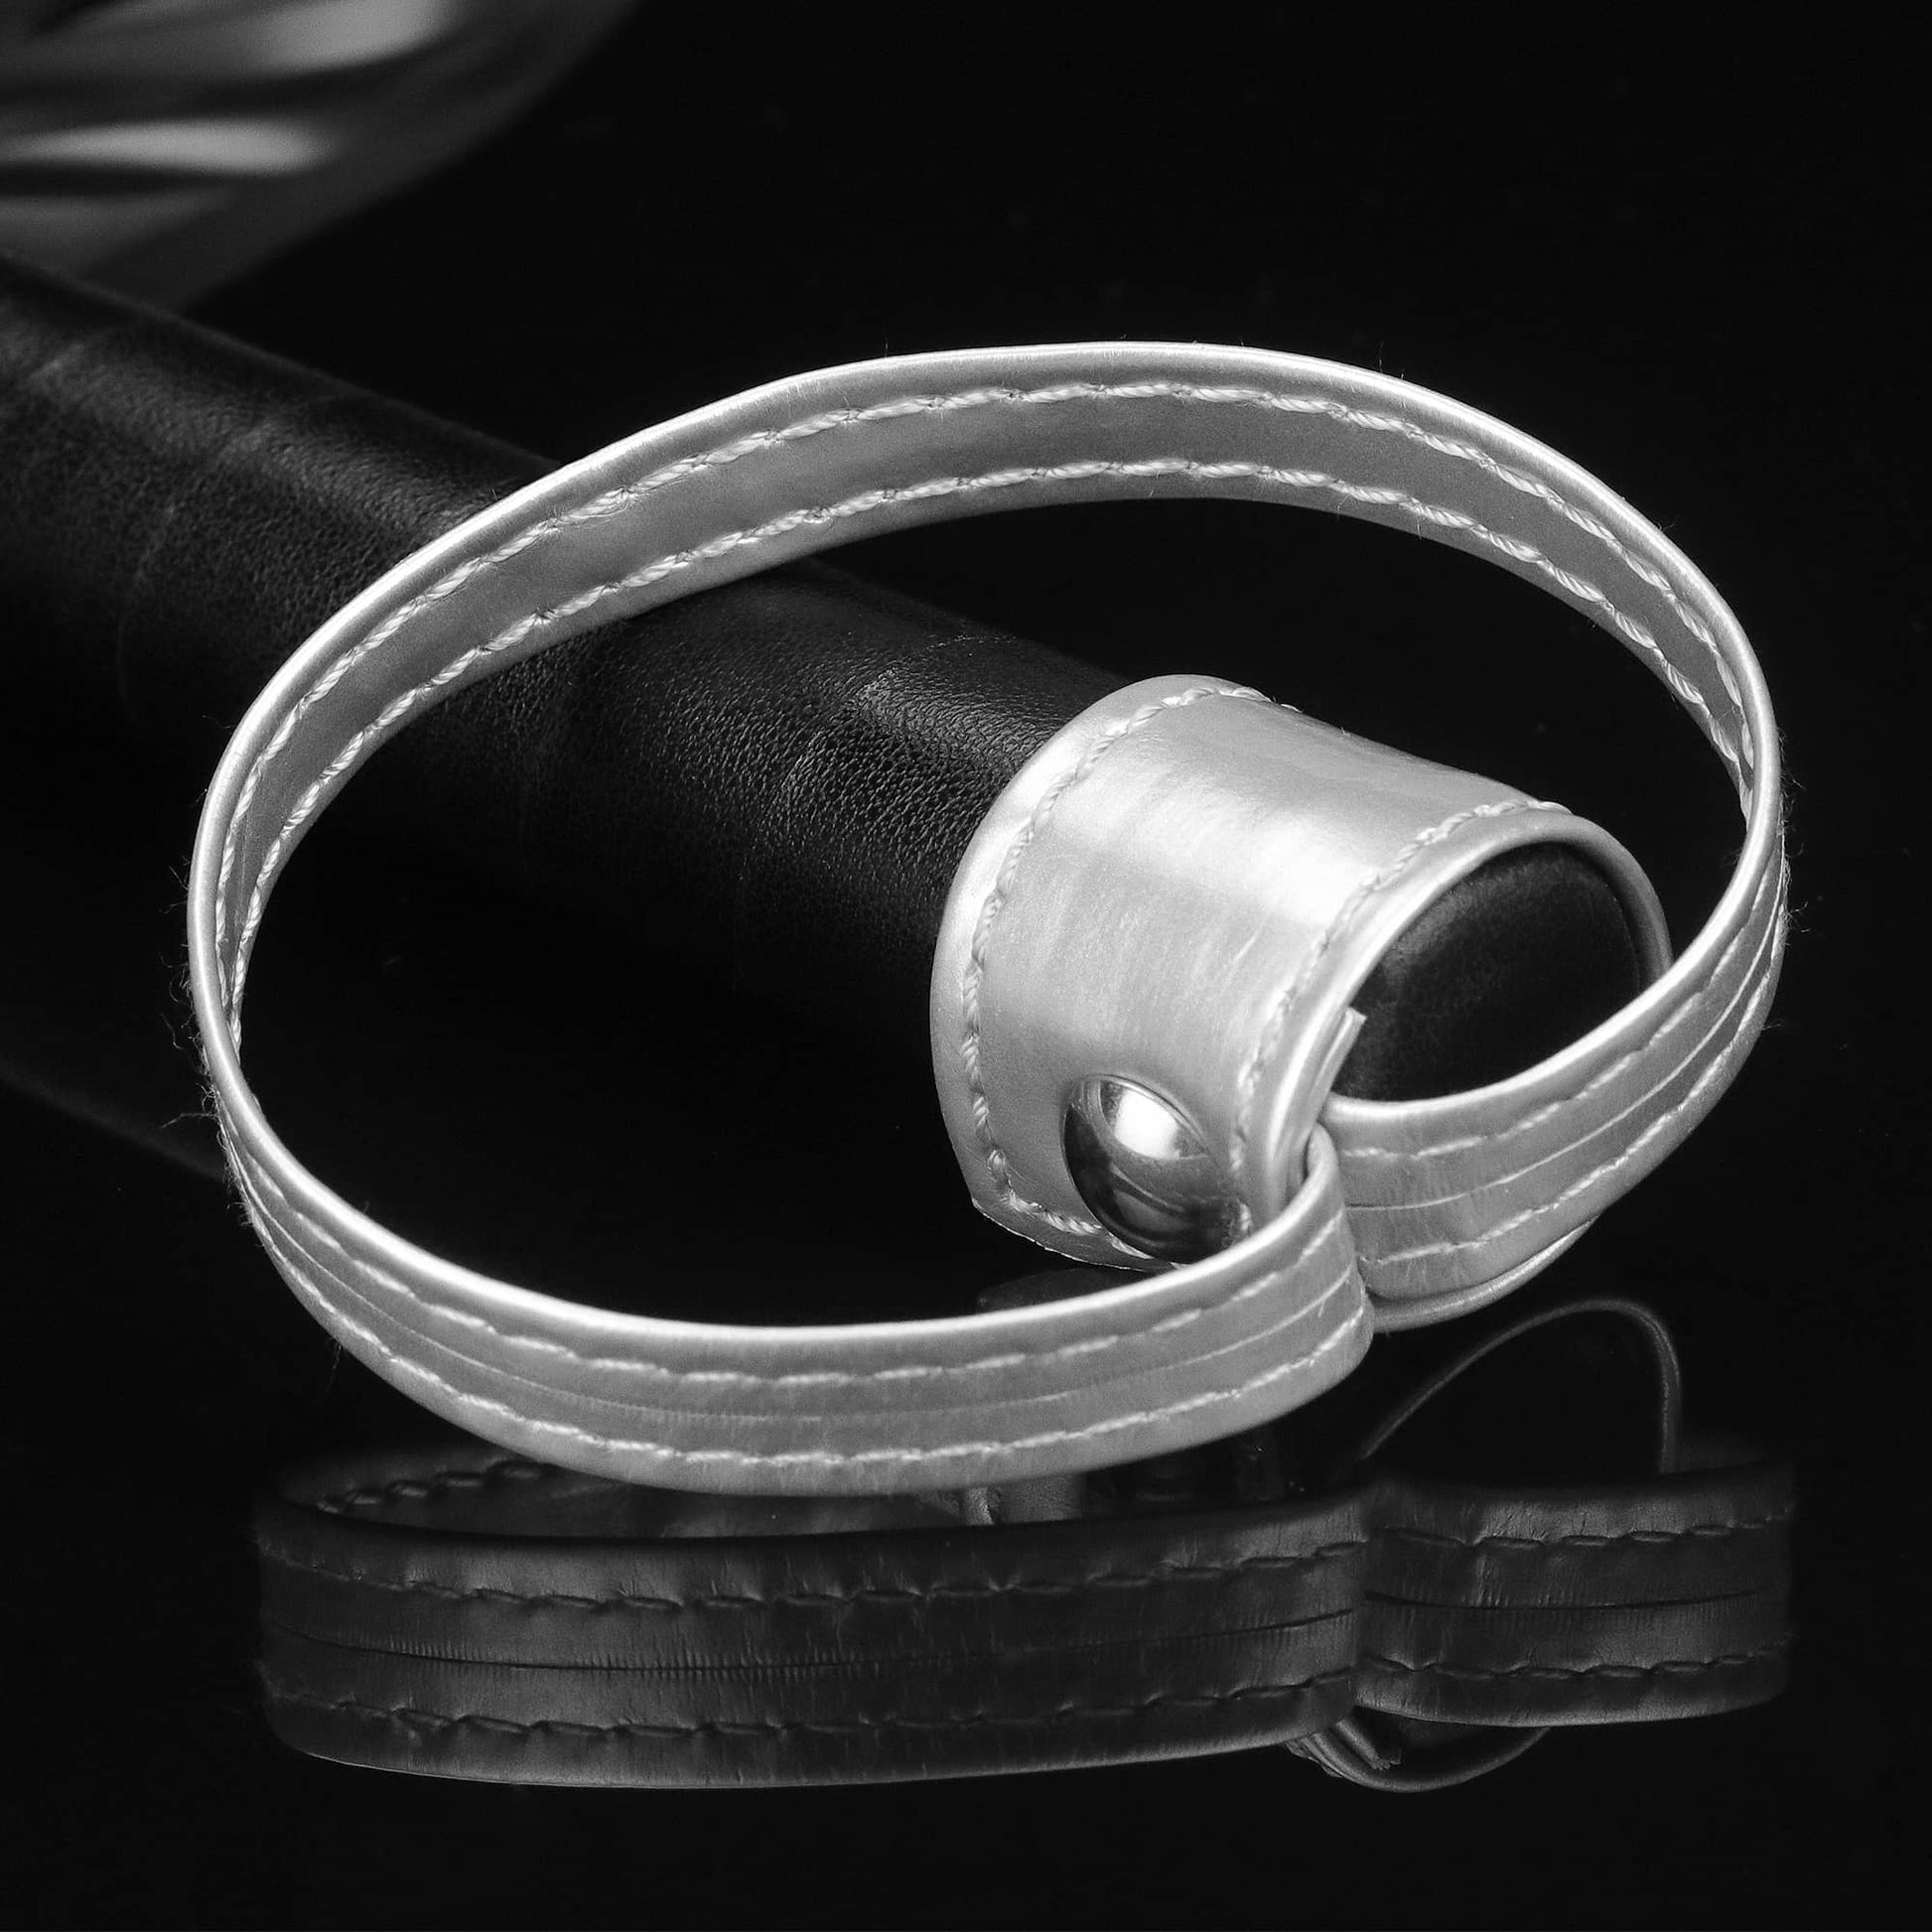 The handle ring of the bdsm sex whip flogger for kinky play